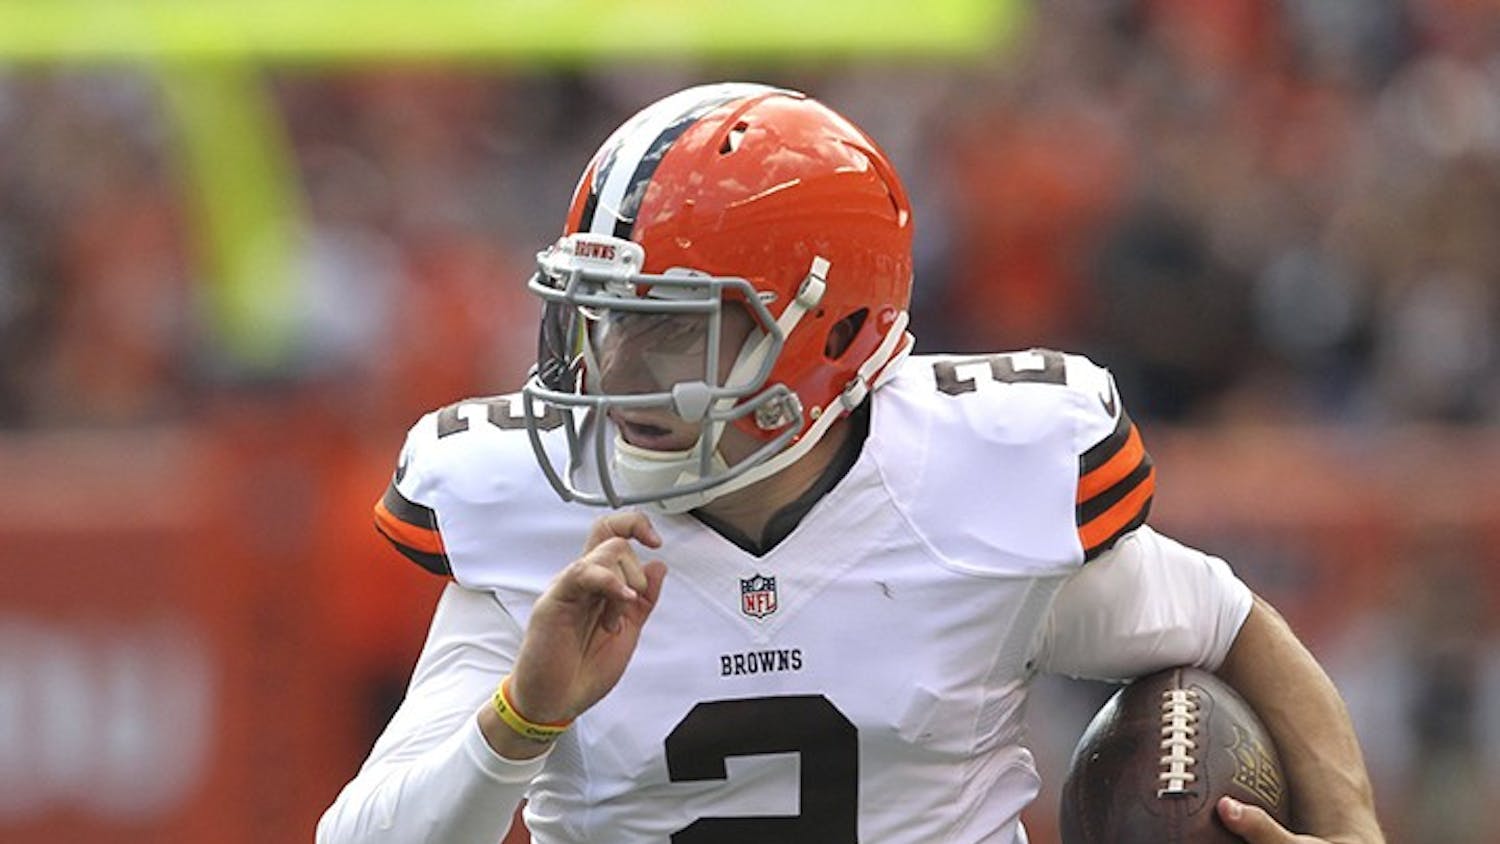 Cleveland Browns back-up quarterback Johnny Manziel runs for 39 yards after a pass catch against the Baltimore Ravens hat was nullified by a penalty on Sunday, Sept. 21, 2014, at FirstEnergy Stadium in Cleveland. (Phil Masturzo/Akron Beacon Journal/MCT)